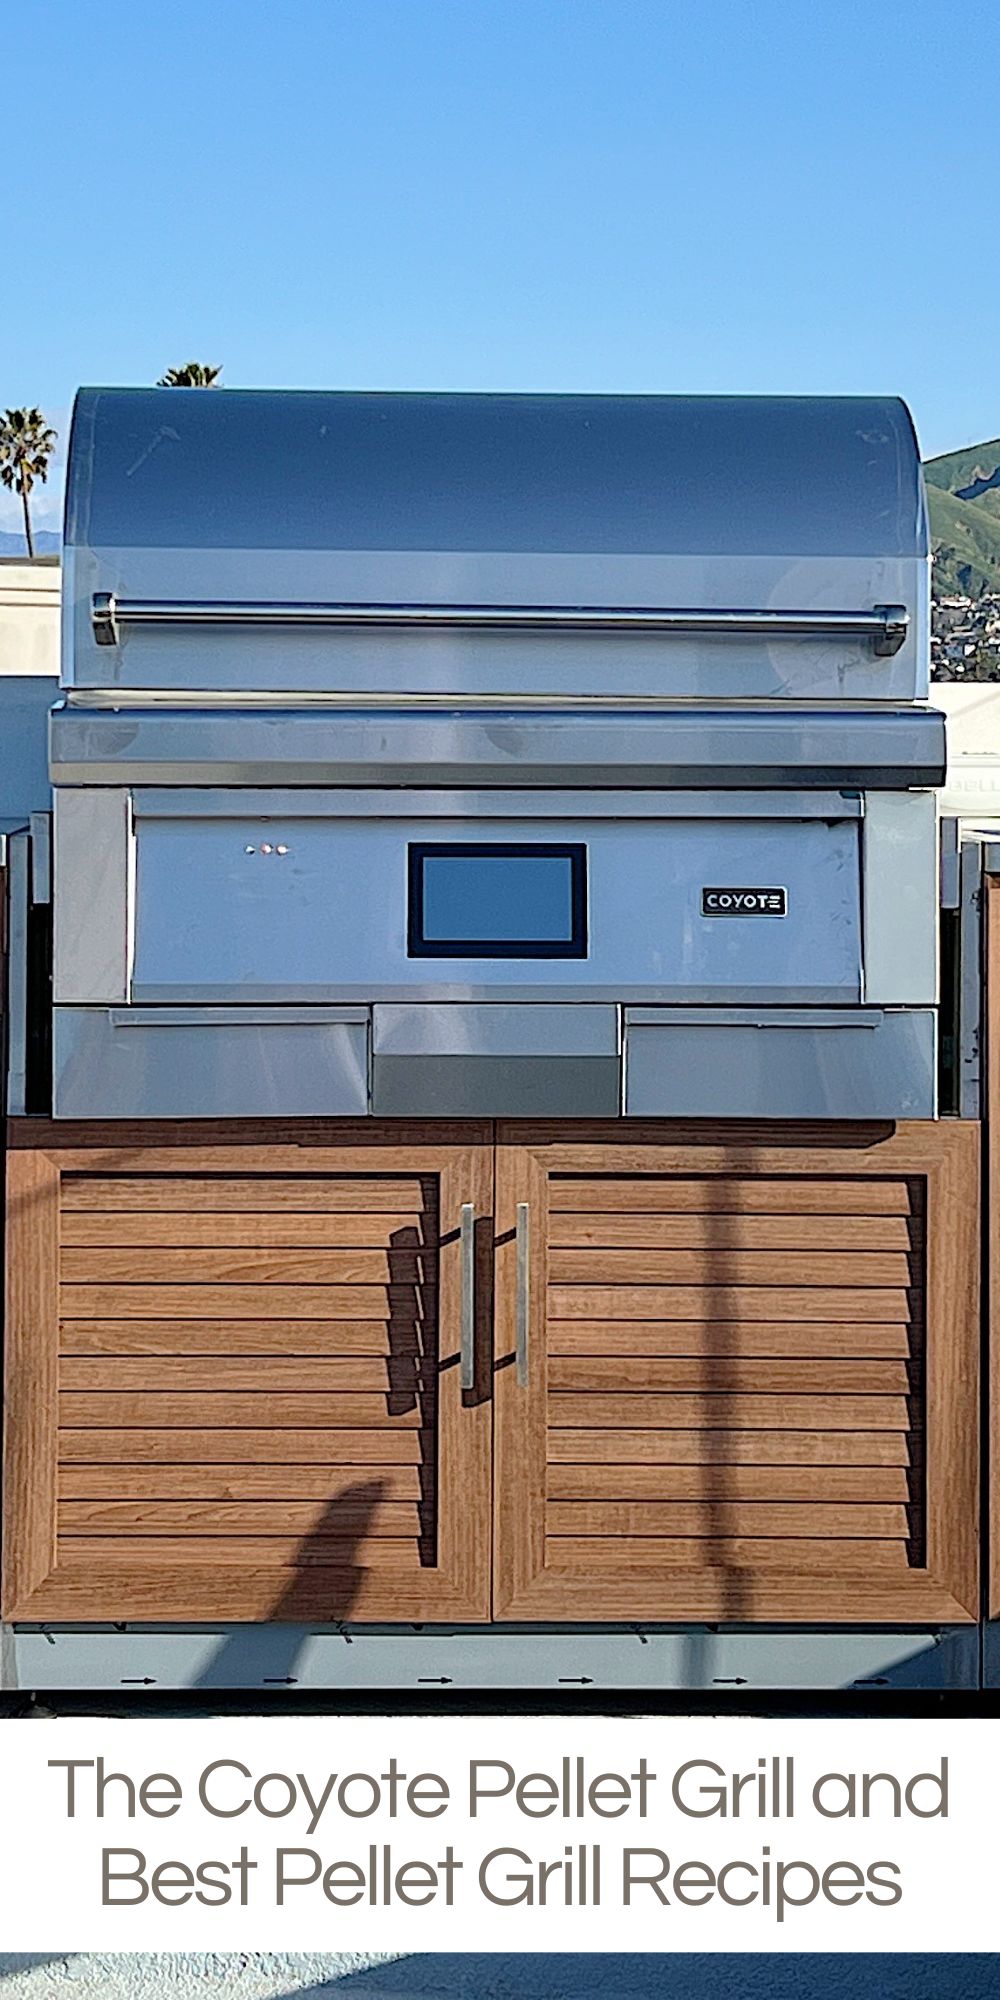 I haven't been this excited about a new tool for cooking in a long time. We installed a Coyote Pellet Grill at the Beach House and I am obsessed!